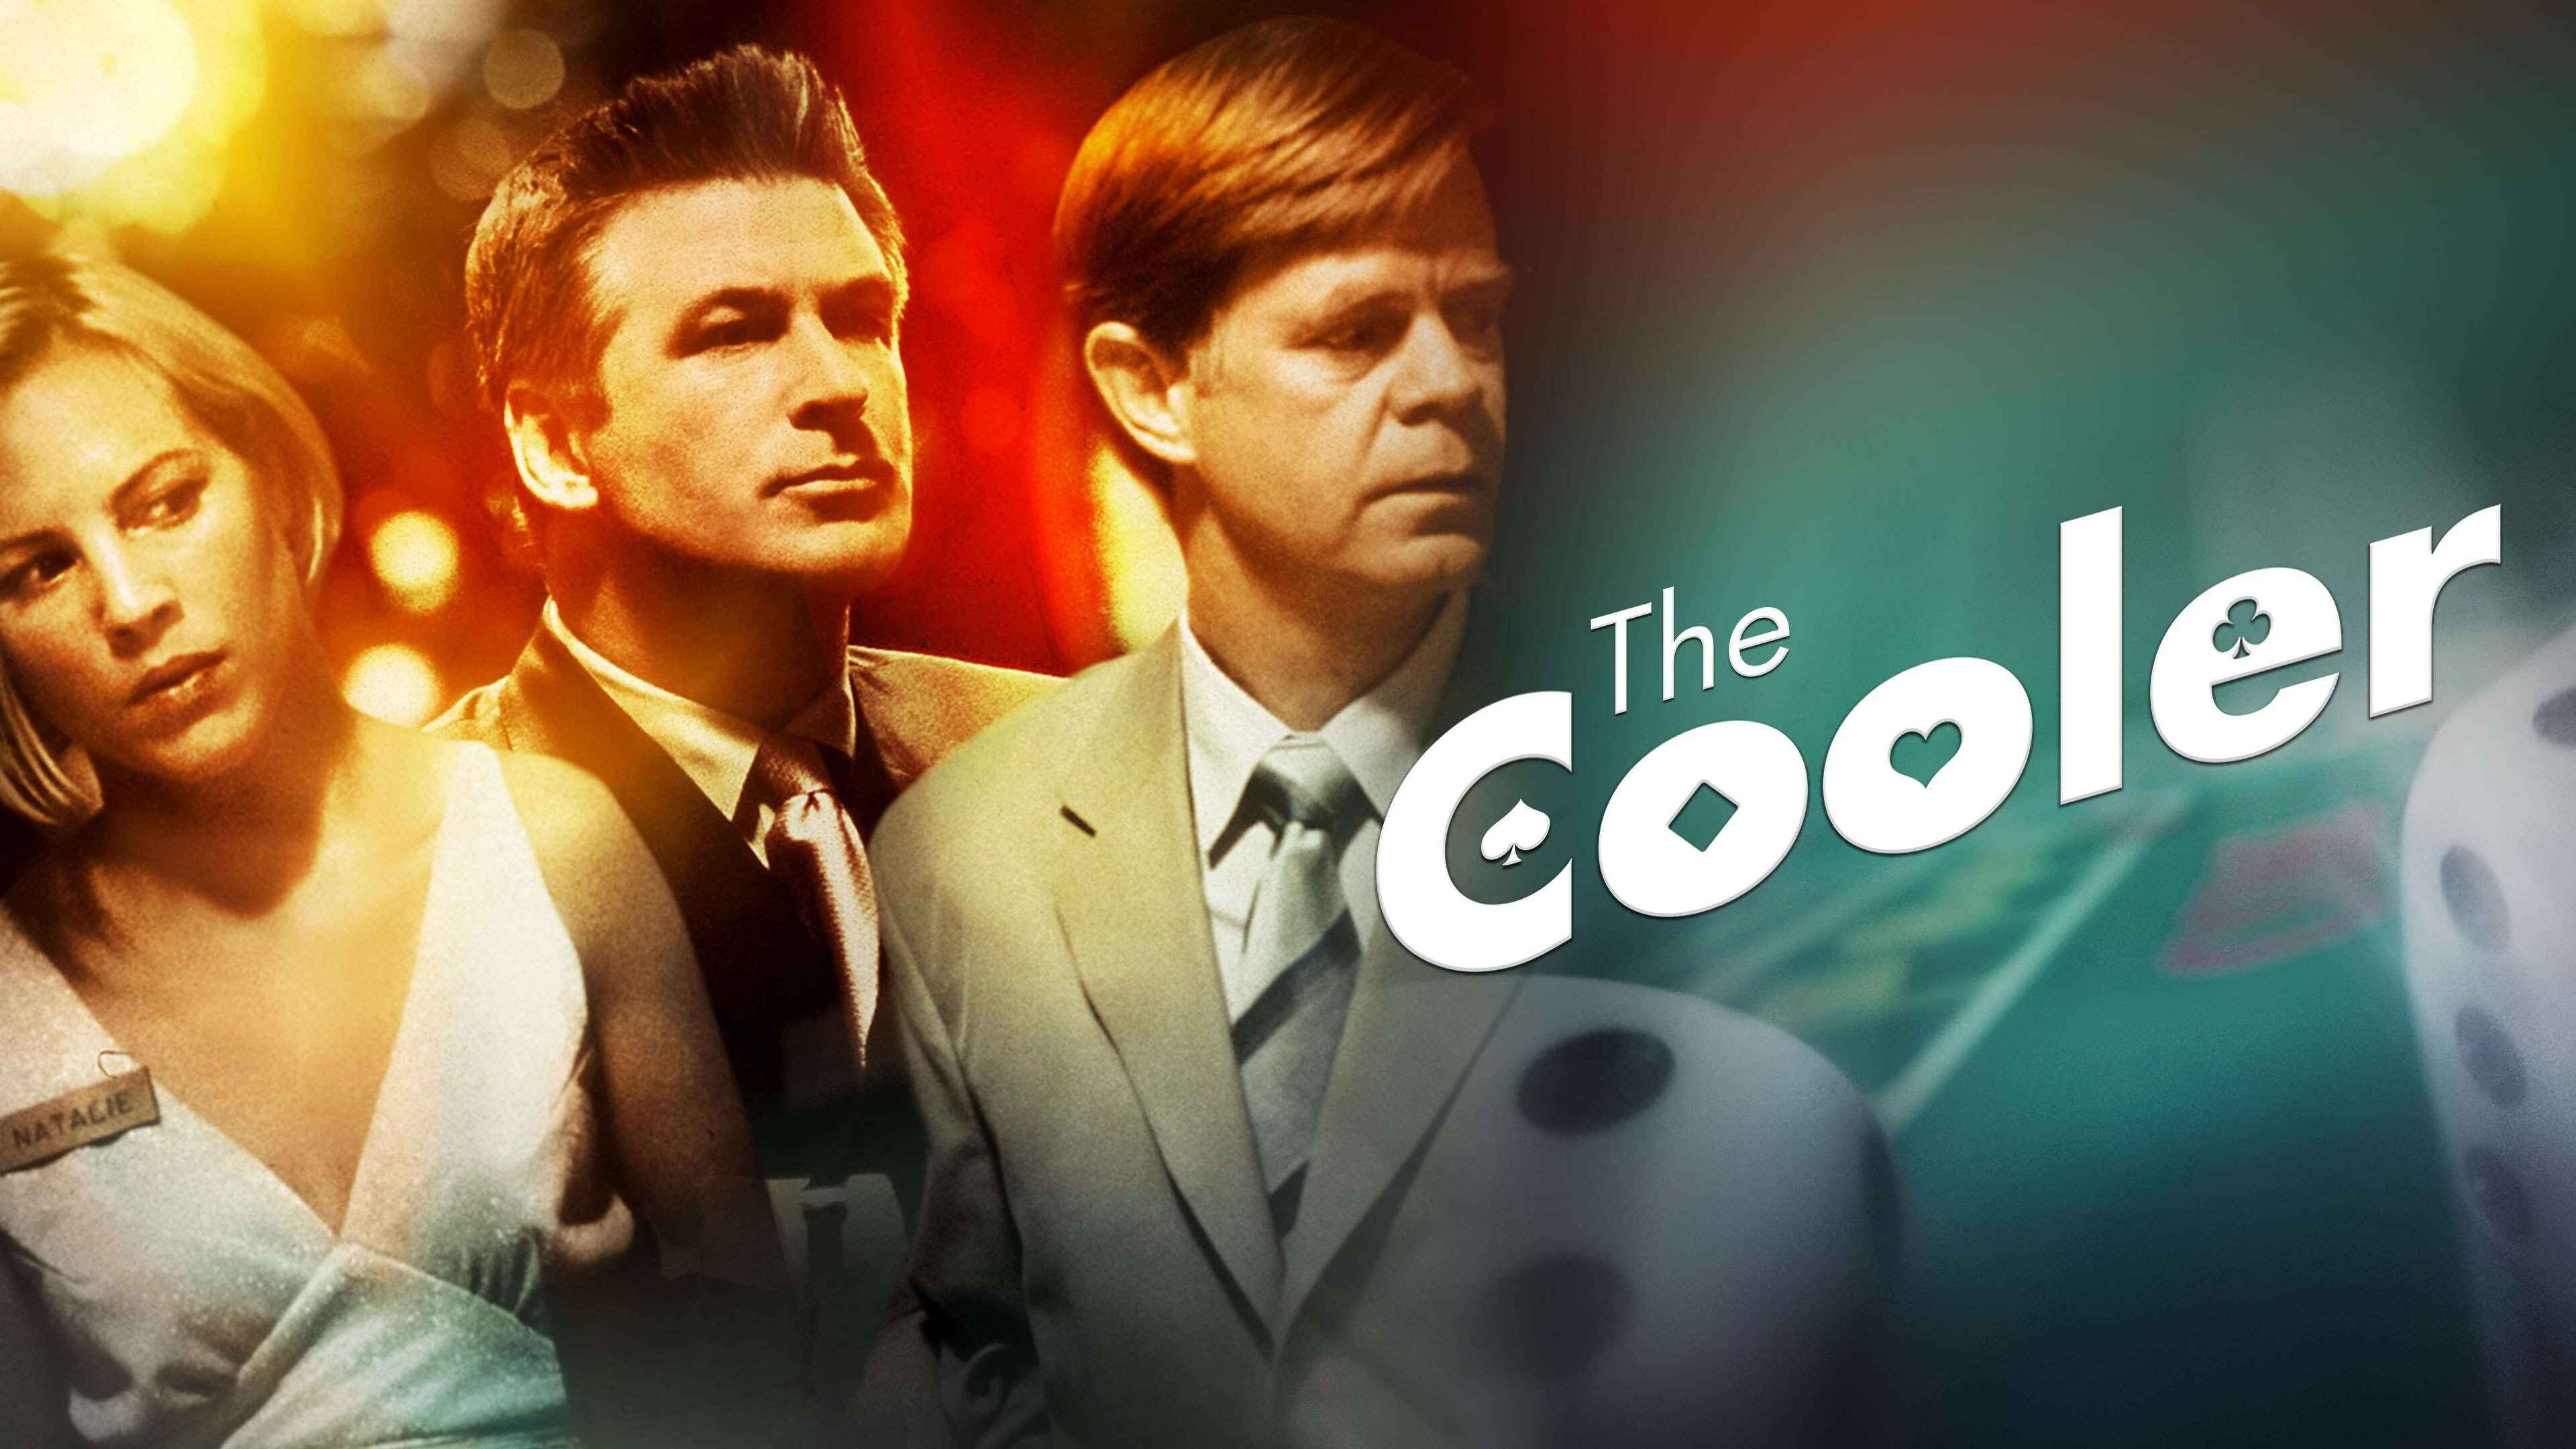 34-facts-about-the-movie-the-cooler